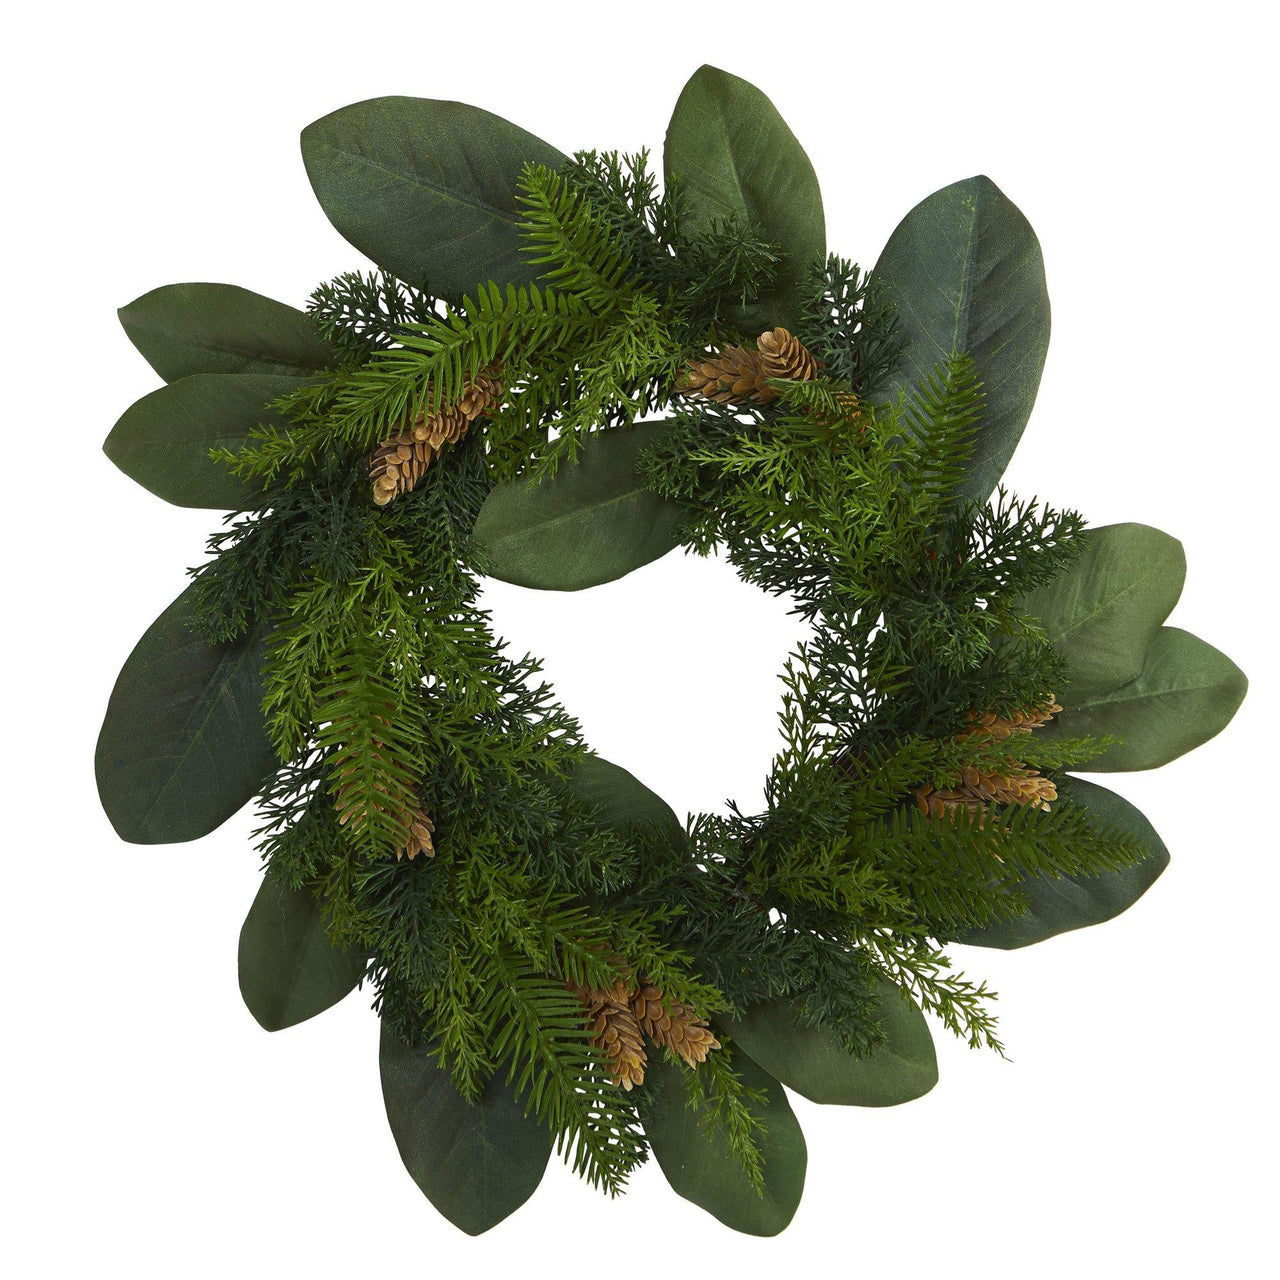 16” Magnolia Leaf and Mixed Pine Artificial Wreath with Pine Cones